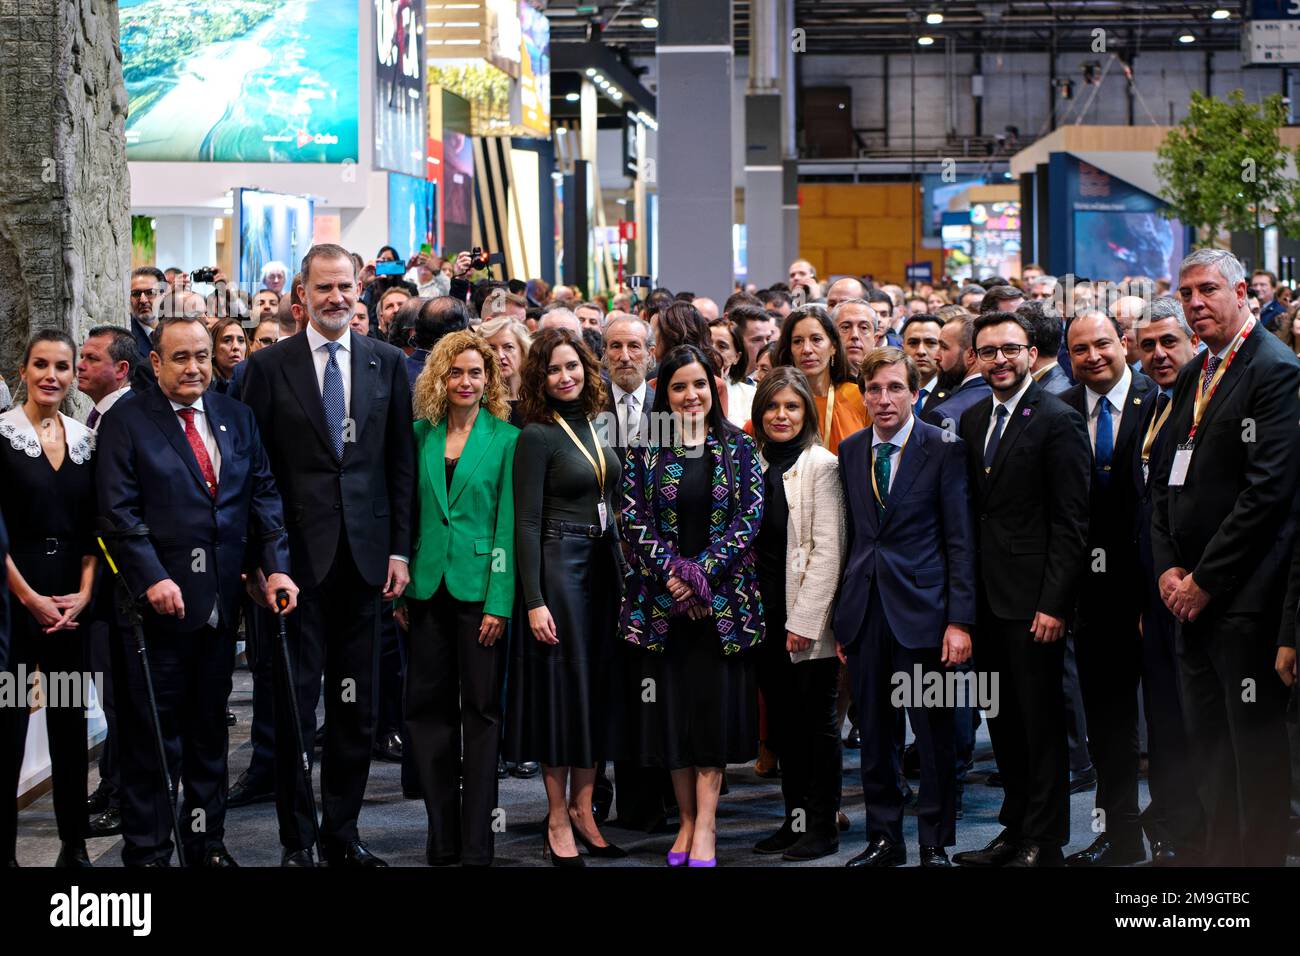 Madrid, Spain. 18th Jan, 2023. FITUR the International Tourism Fair of Spain 2023. SS.MM. the King and Queen of Spain and different authorities officially inaugurate FITUR 2023, the International Tourism Fair. Queen Letizia (1l); The president of Guatemala, Alejandro Giammattei (2l); King Felipe VI (3l); the president of the Congress of Deputies, Meritxell Batet (4l); the president of the Community of Madrid, Isabel Diaz Ayuso (5l); the mayor of Madrid, Jose Luis Martinez-Almeida (5r); Jose Vicente de los Mozos, President of the IFEMA MADRID Executive Committee (1r). IFEMA, Madrid, Spain. Cre Stock Photo